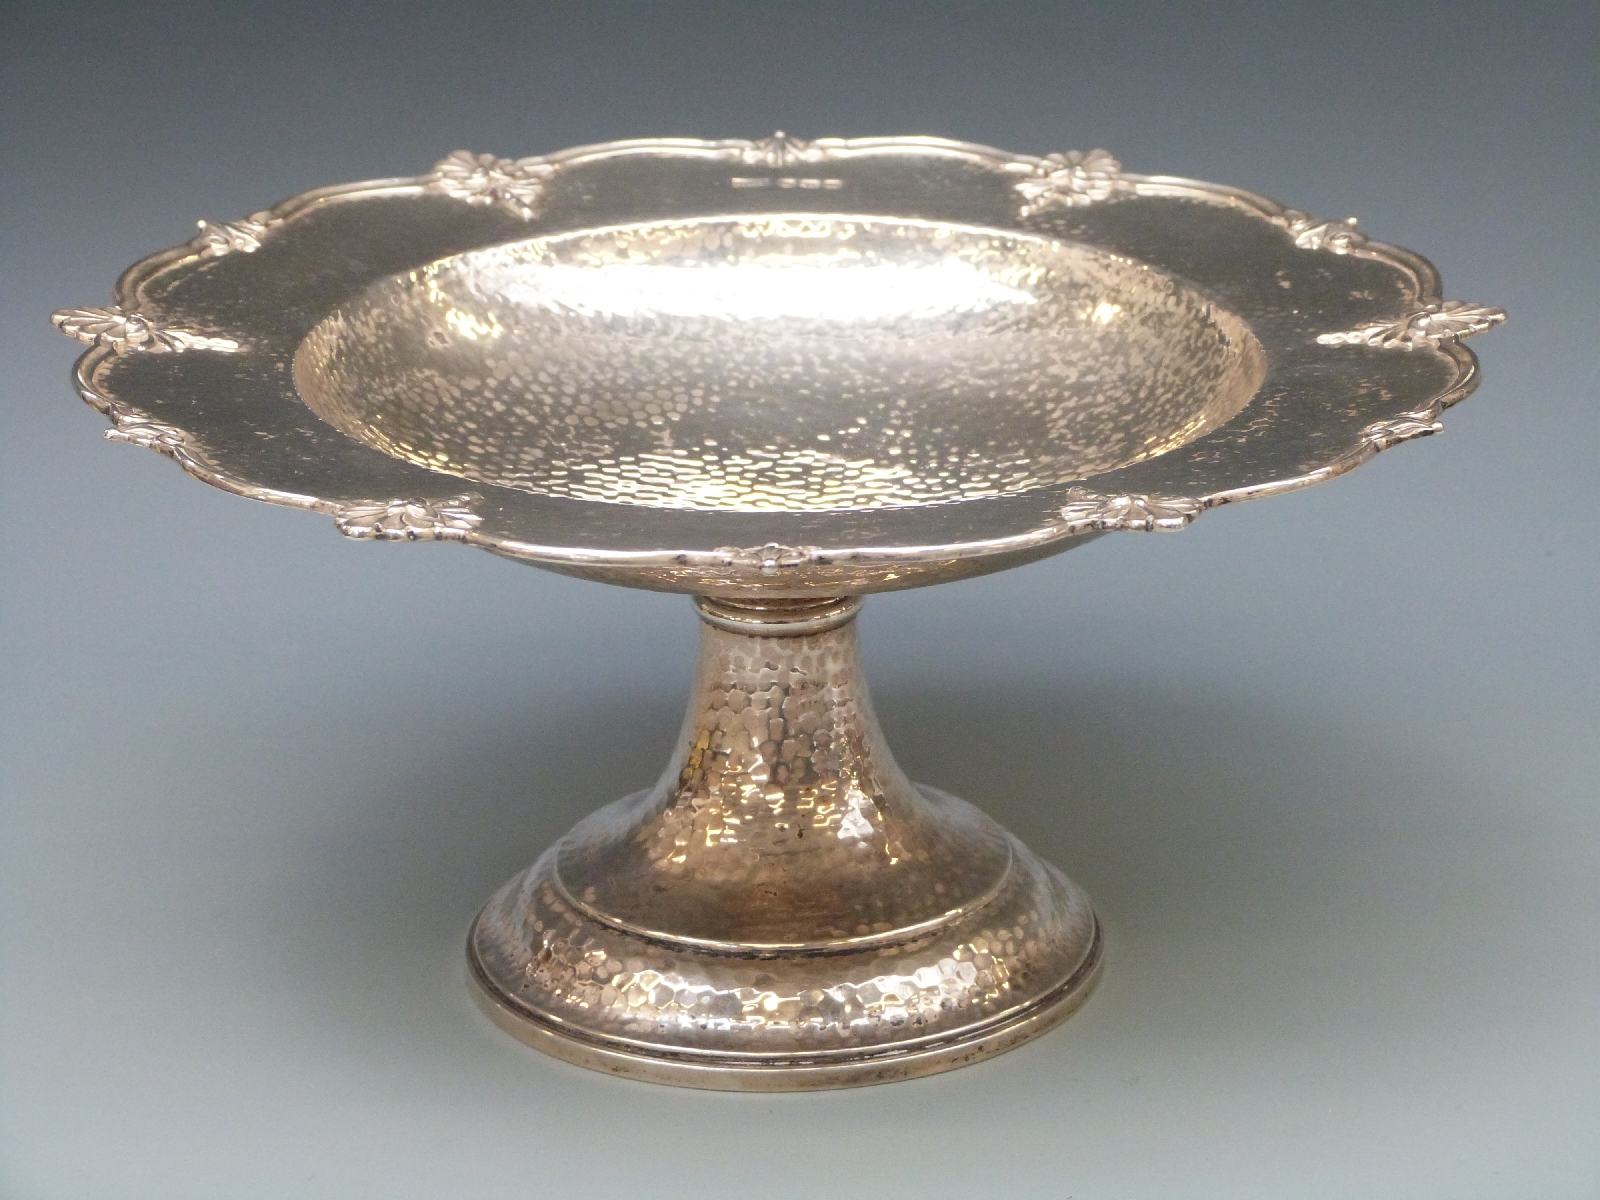 A George V Walker & Hall hallmarked silver Arts & Crafts style tazza with hammered decoration,